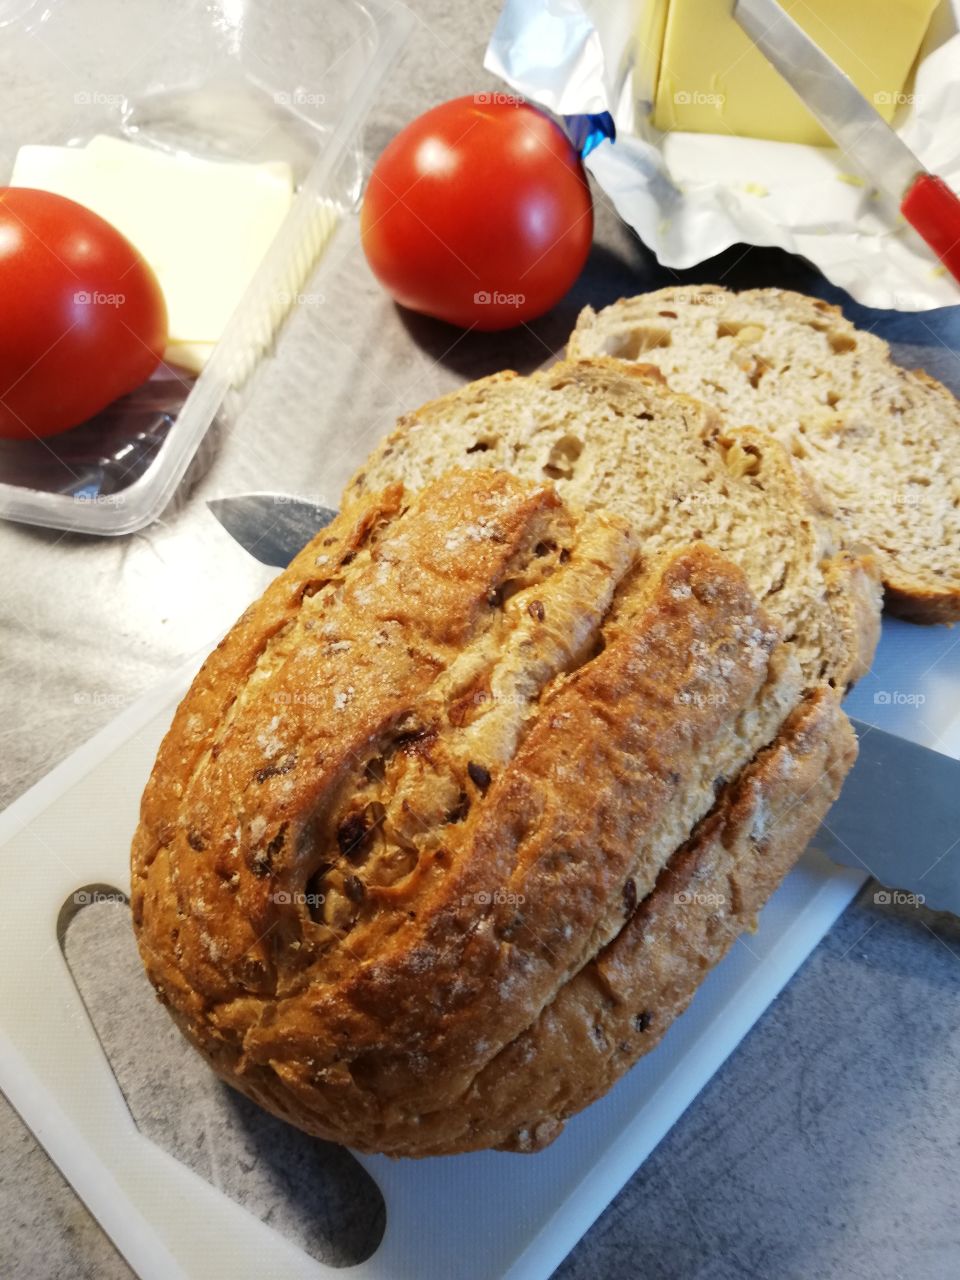 A loaf of bread with fruit and seeds on a chopping board, some crumbs on it. An edge of a knife is wavy. In an open butter package is another knife with red handle. A tomato and cheese slices in a plastic box